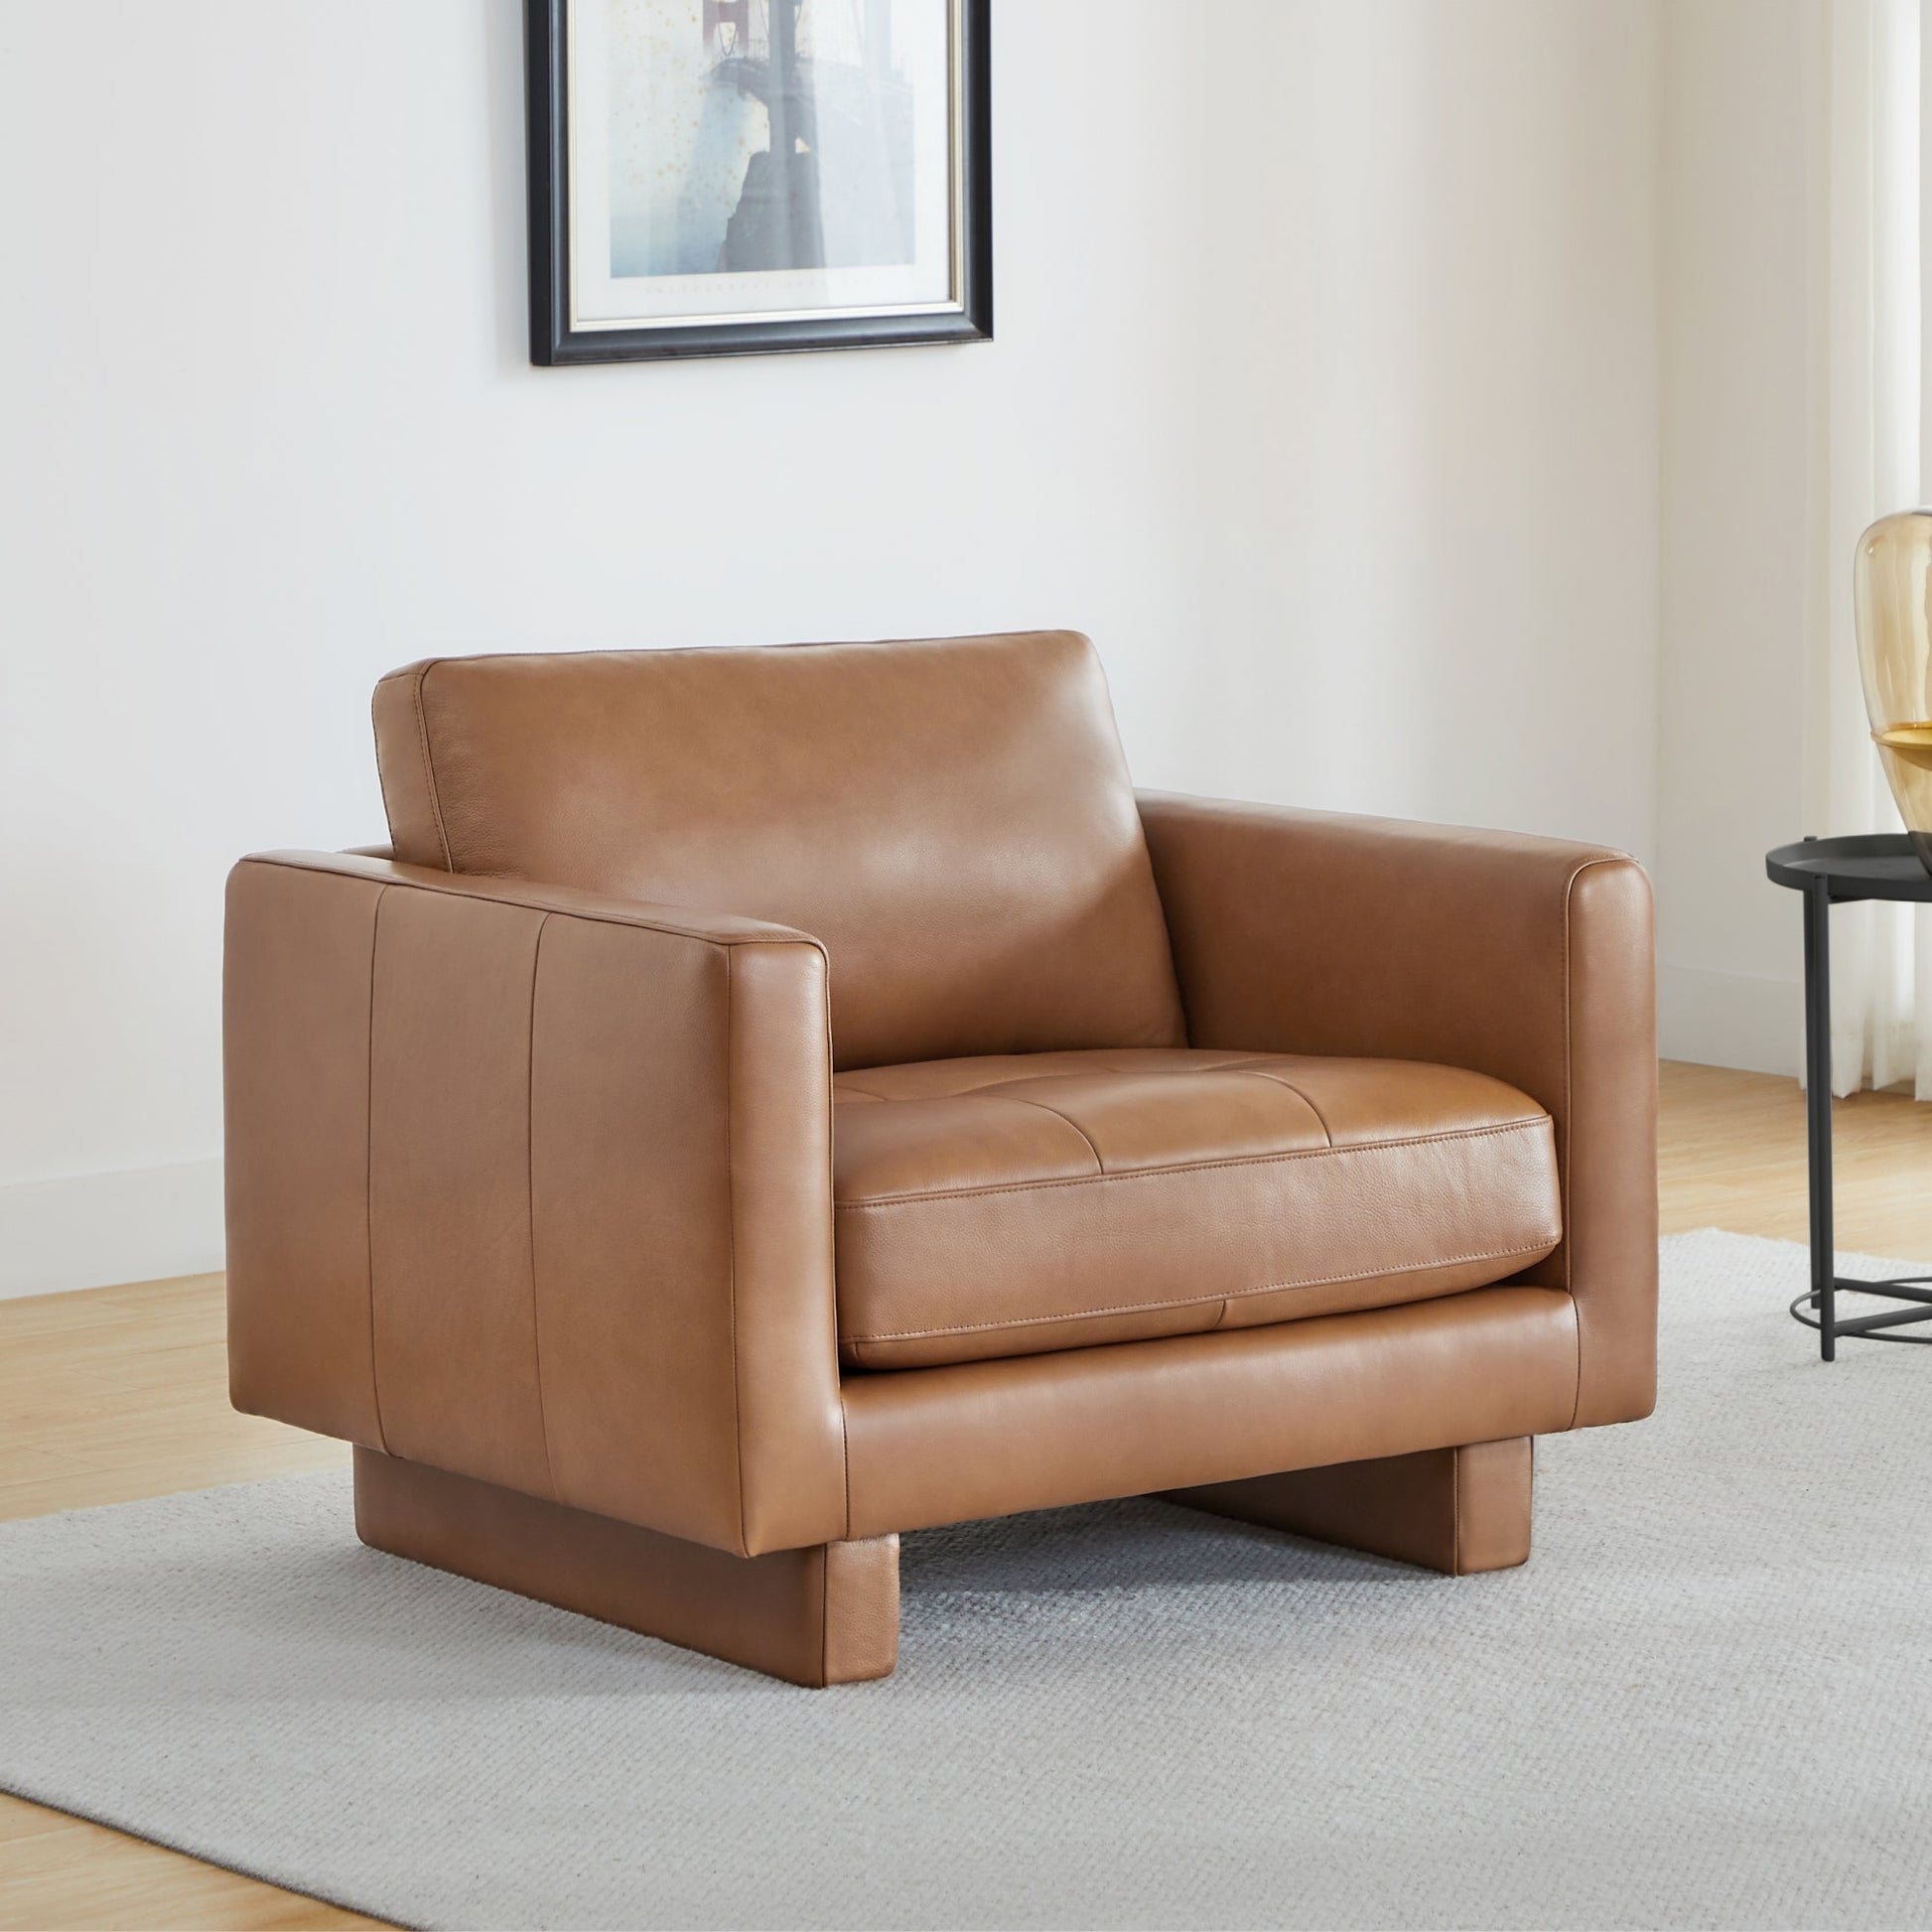 CHITA LIVING-Senan Mid-Century Modern Genunie Leather Armchair-Accent Chair-Genuine Top-grain Leather-Chair with Leather Legs-